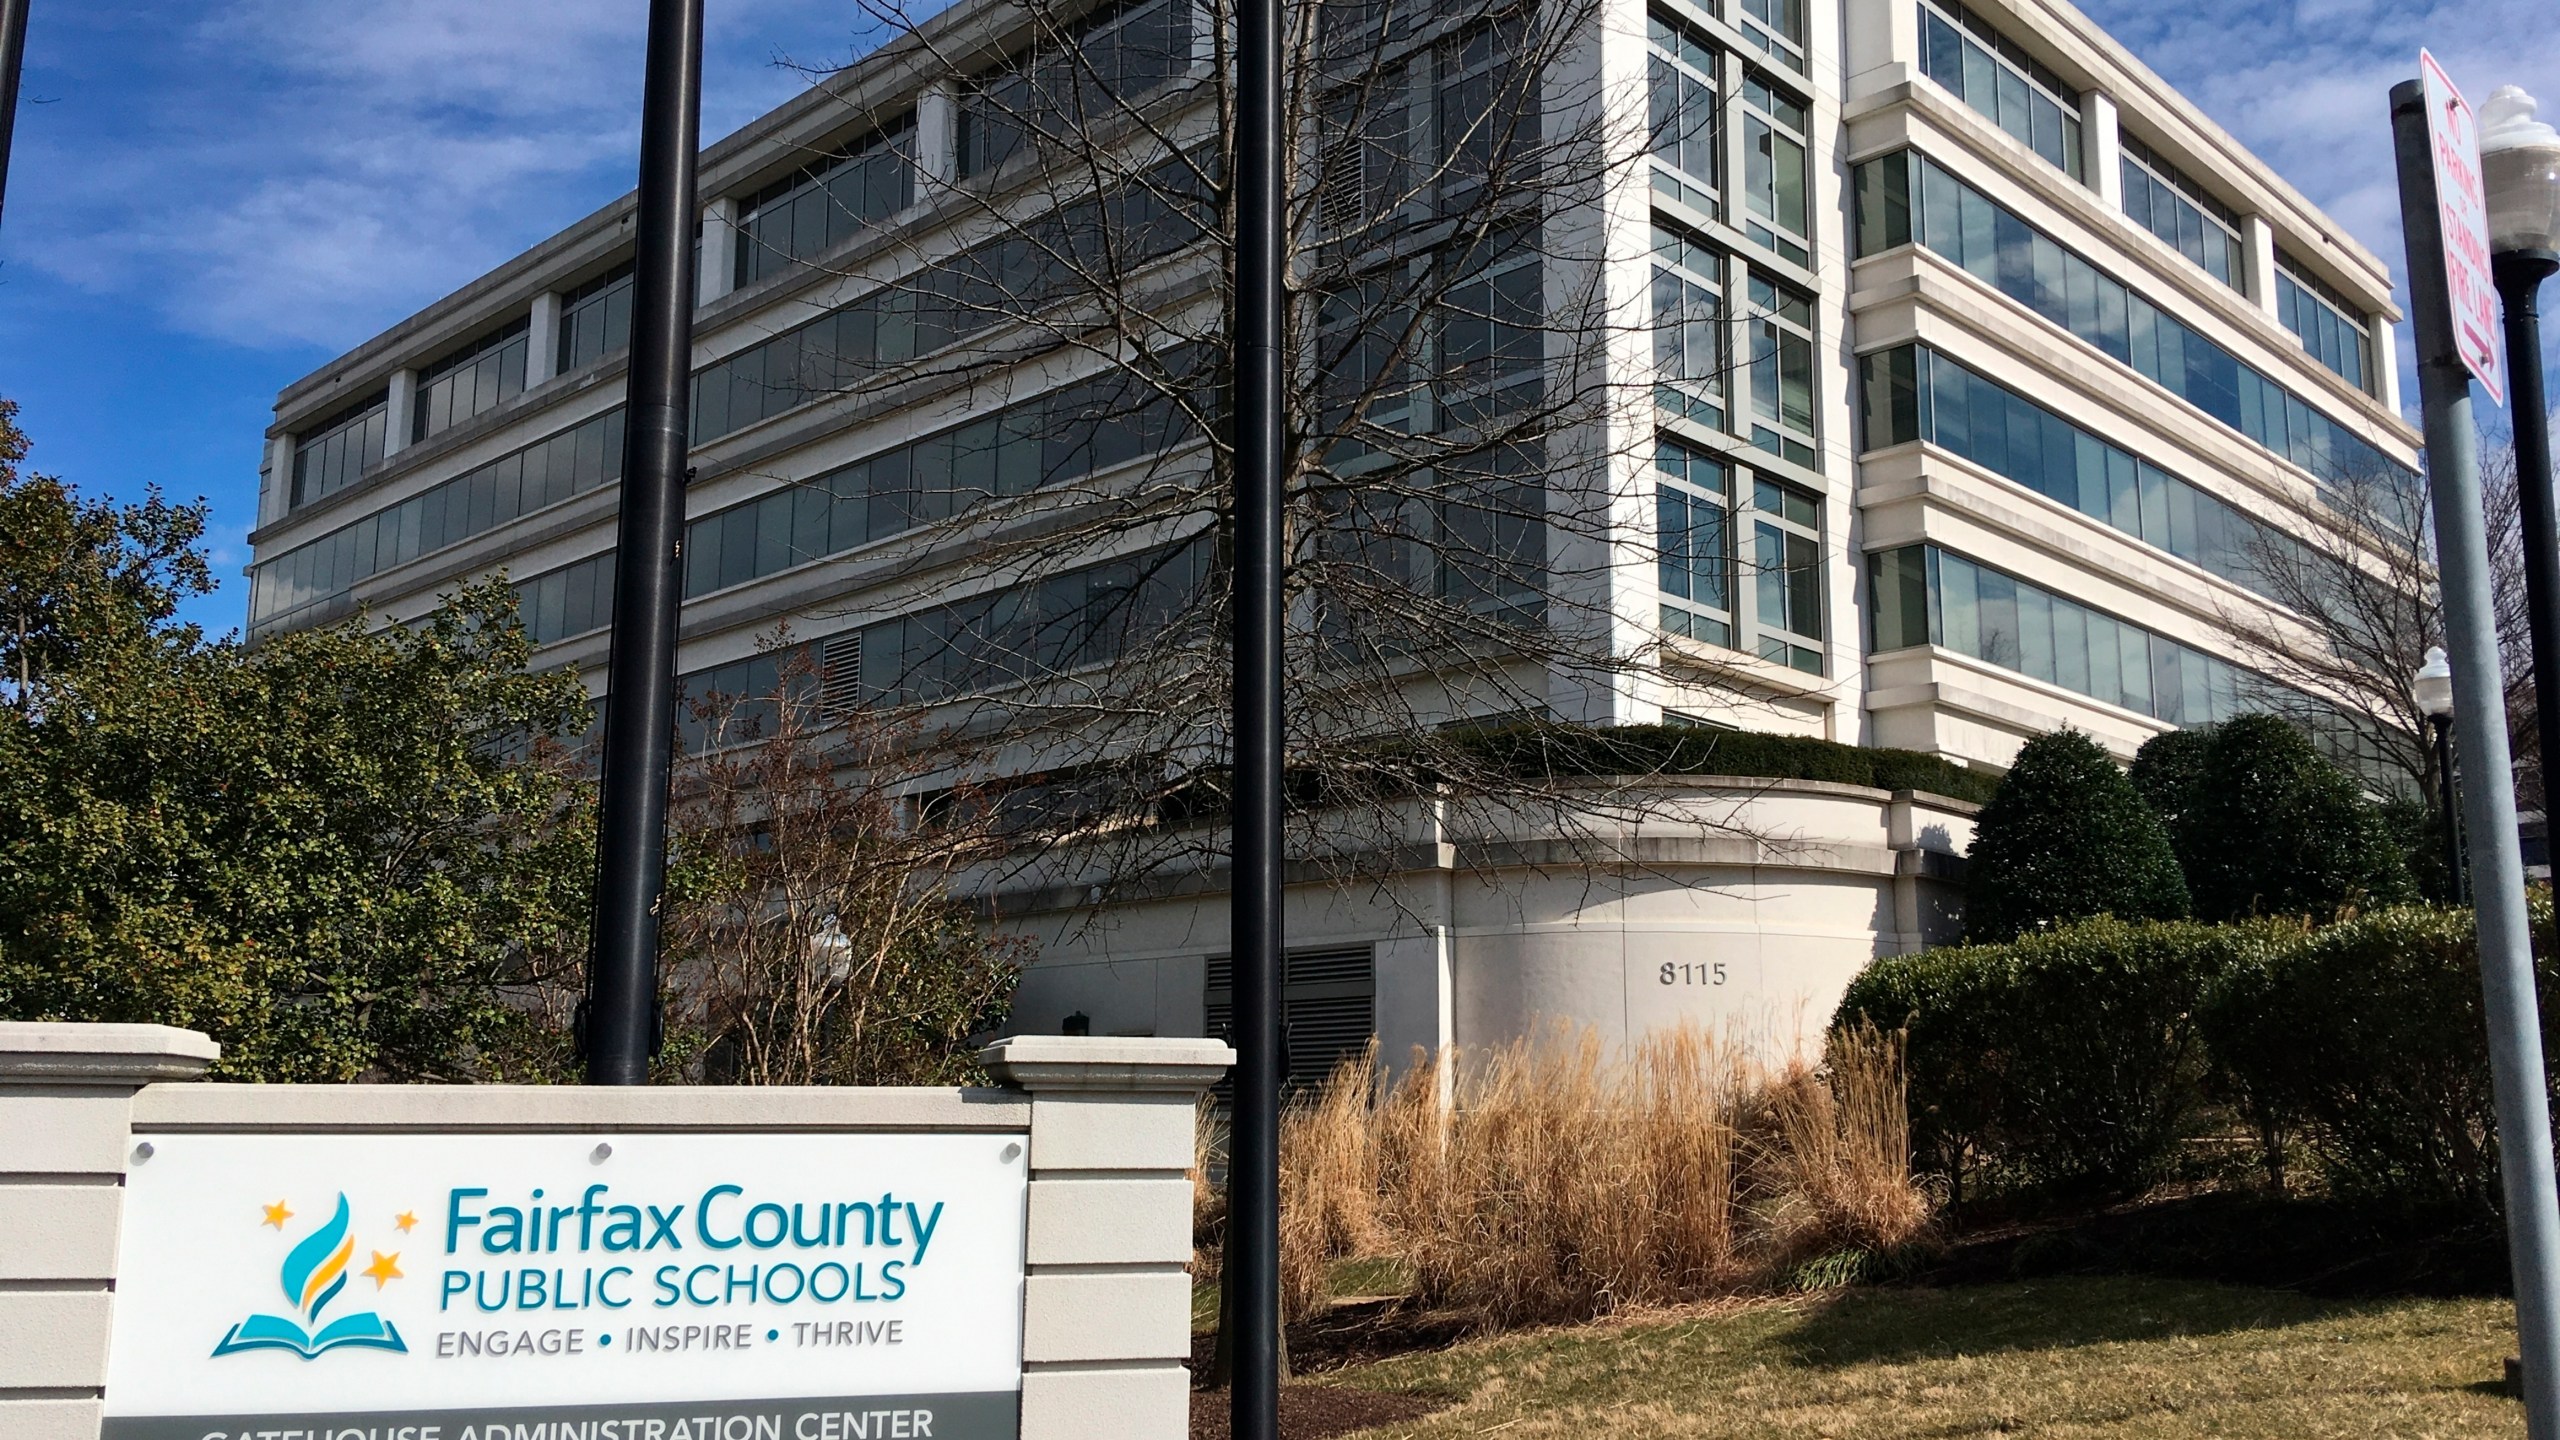 FILE - Fairfax County Public Schools is seen, March 4, 2019, in Merrifield, Va. A 24-year-old woman, identified in court papers only by her initials B.R., told jurors Tuesday, March 26, 2024, that she was repeatedly raped and sexually harassed a decade ago as a seventh grade student in Virginia, and that school officials reacted to her pleas for help with indifference. The case involving B.R. stretches back to allegations she was raped and harassed as a 12-year-old student at Rachel Carson Middle School, a part of the state's largest school system, Fairfax County Public Schools. (AP Photo/Matthew Barakat, File)